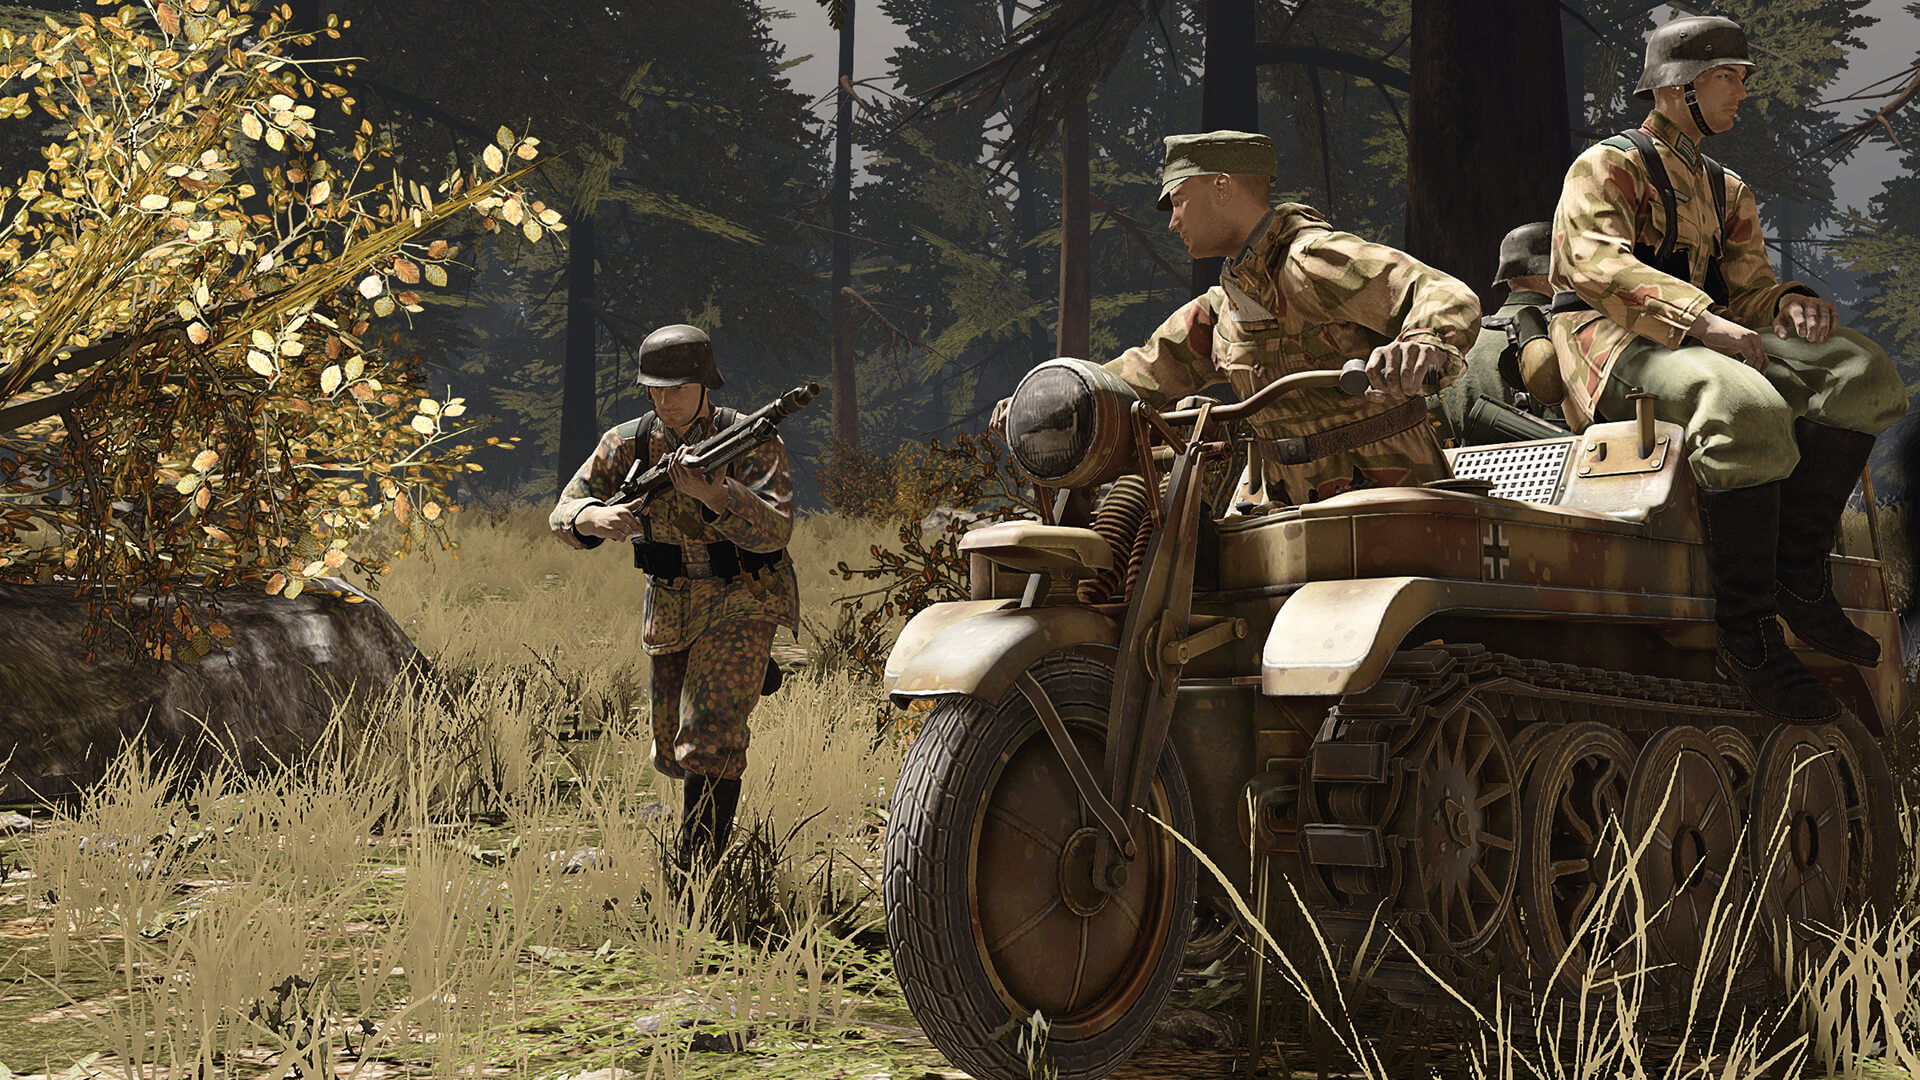 heroes and generals hacks you pay for